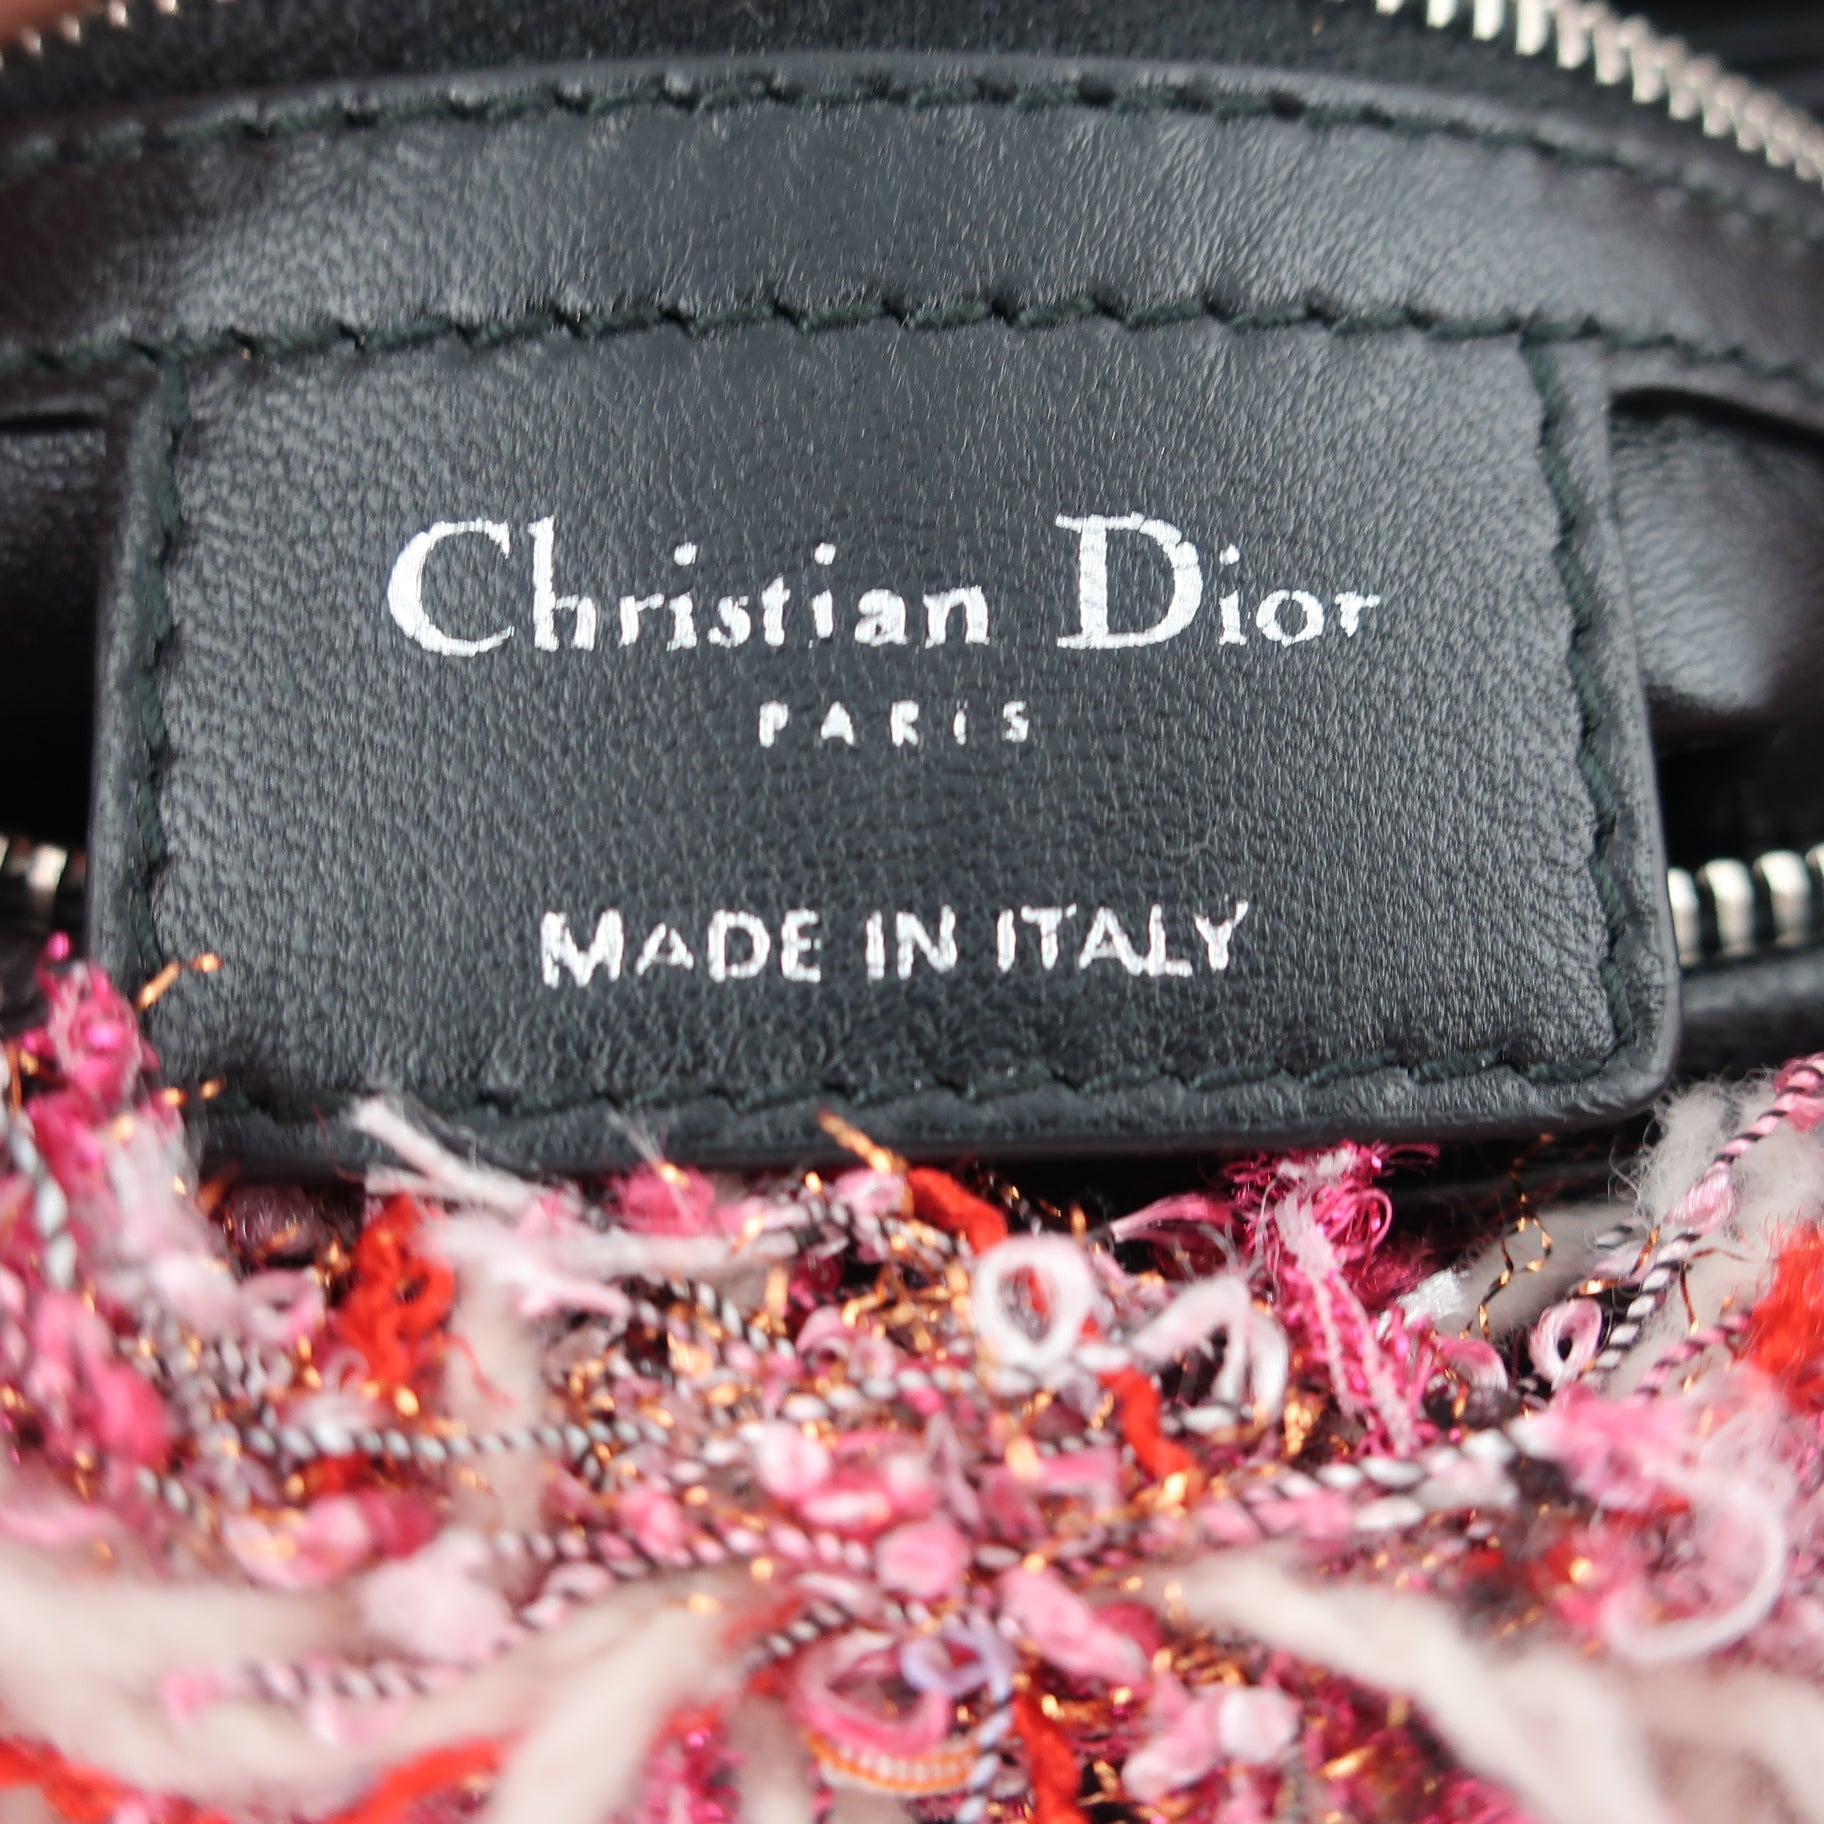 How to tell if a Dior Bag Is Authentic – clozenough